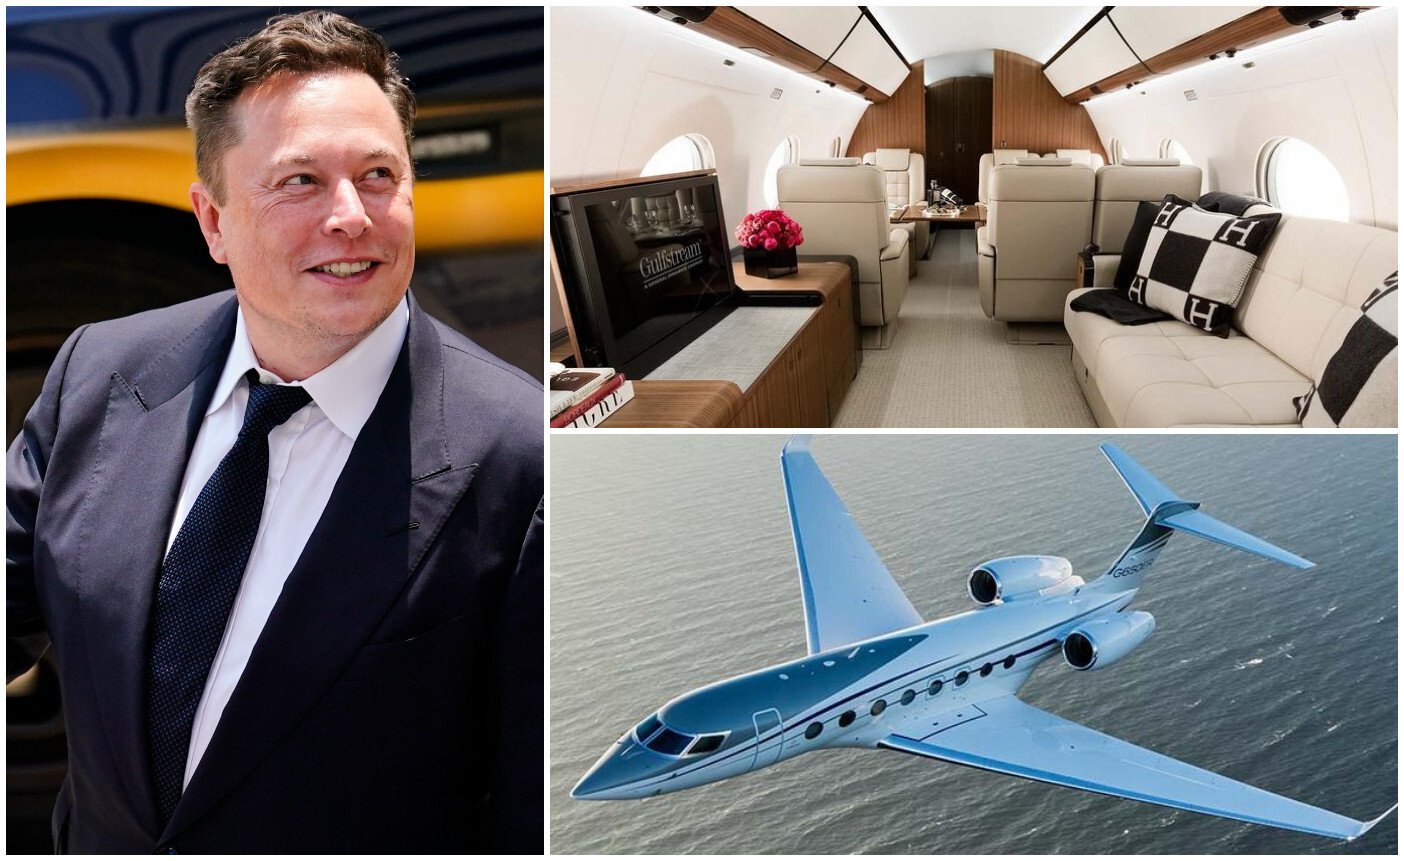 Find out more about Elon Musk’s Gulfstream private jet worth US$70 million. Photos: AP, gulfstream.com